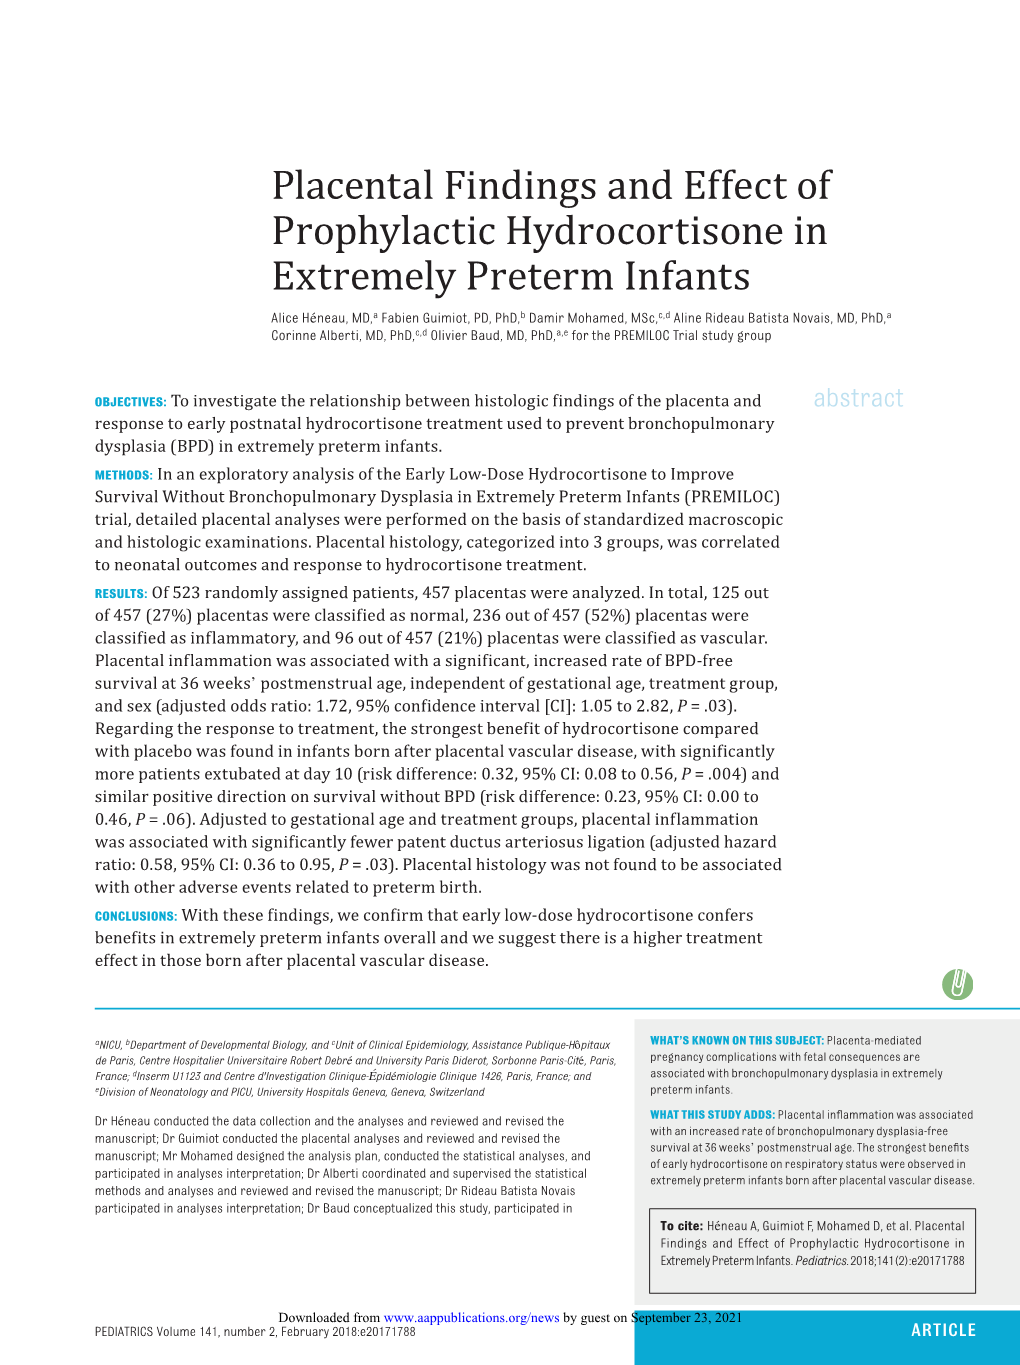 Placental Findings and Effect of Prophylactic Hydrocortisone in Extremely Preterm Infants